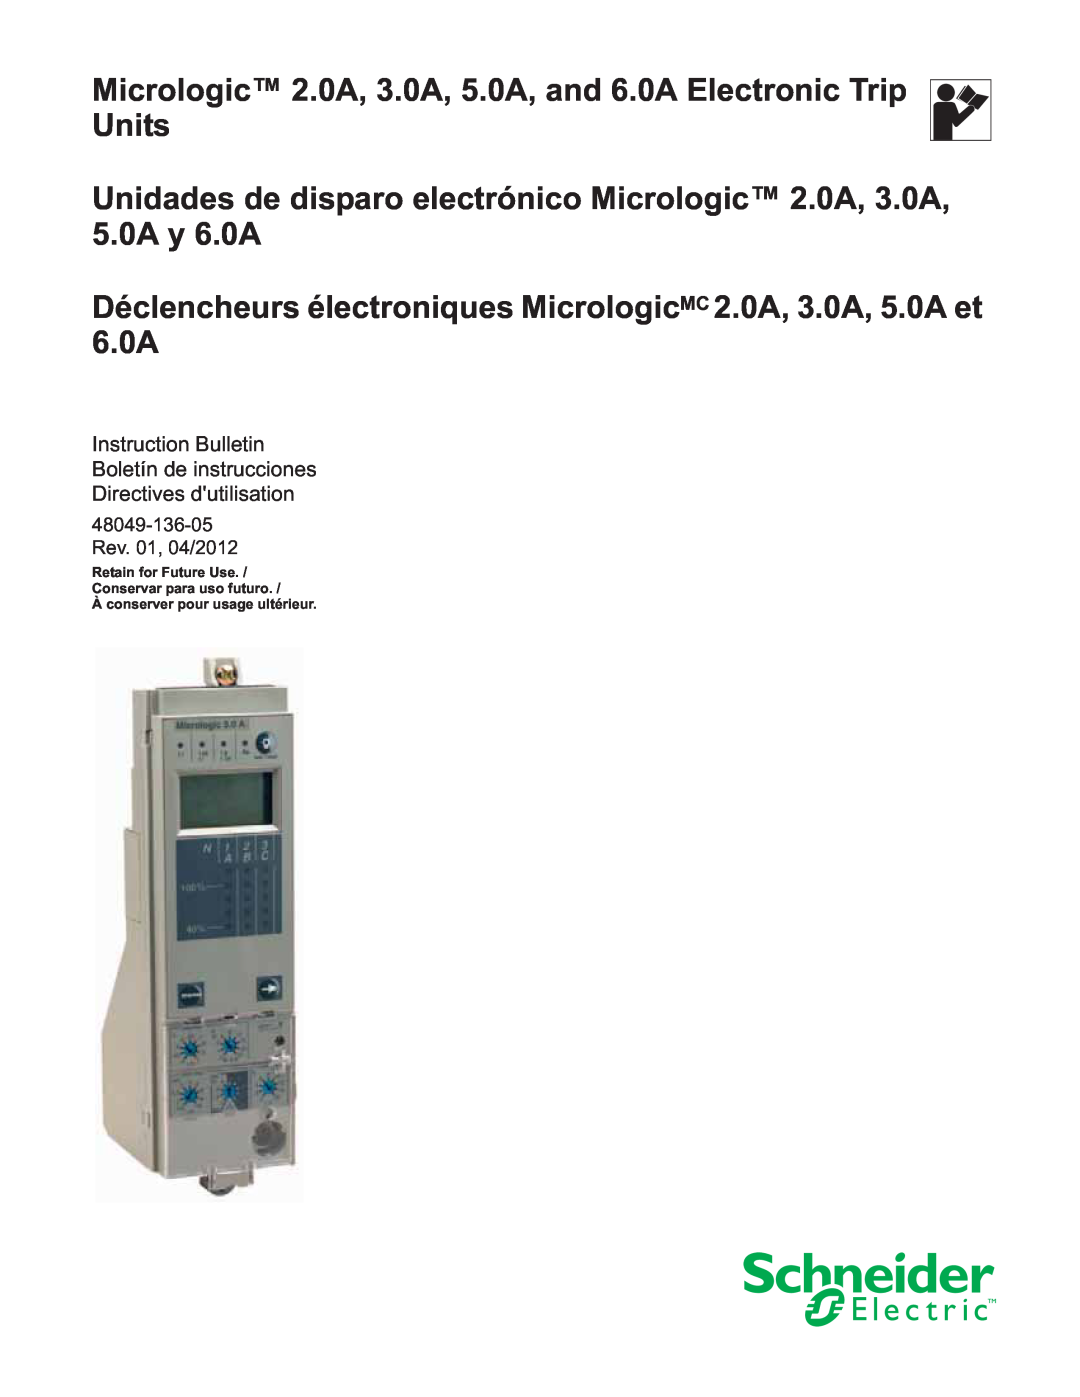 Schneider Electric manual Micrologic 2.0A, 3.0A, 5.0A, and 6.0A Electronic Trip Units, 48049-136-05 Rev. 01, 04/2012 